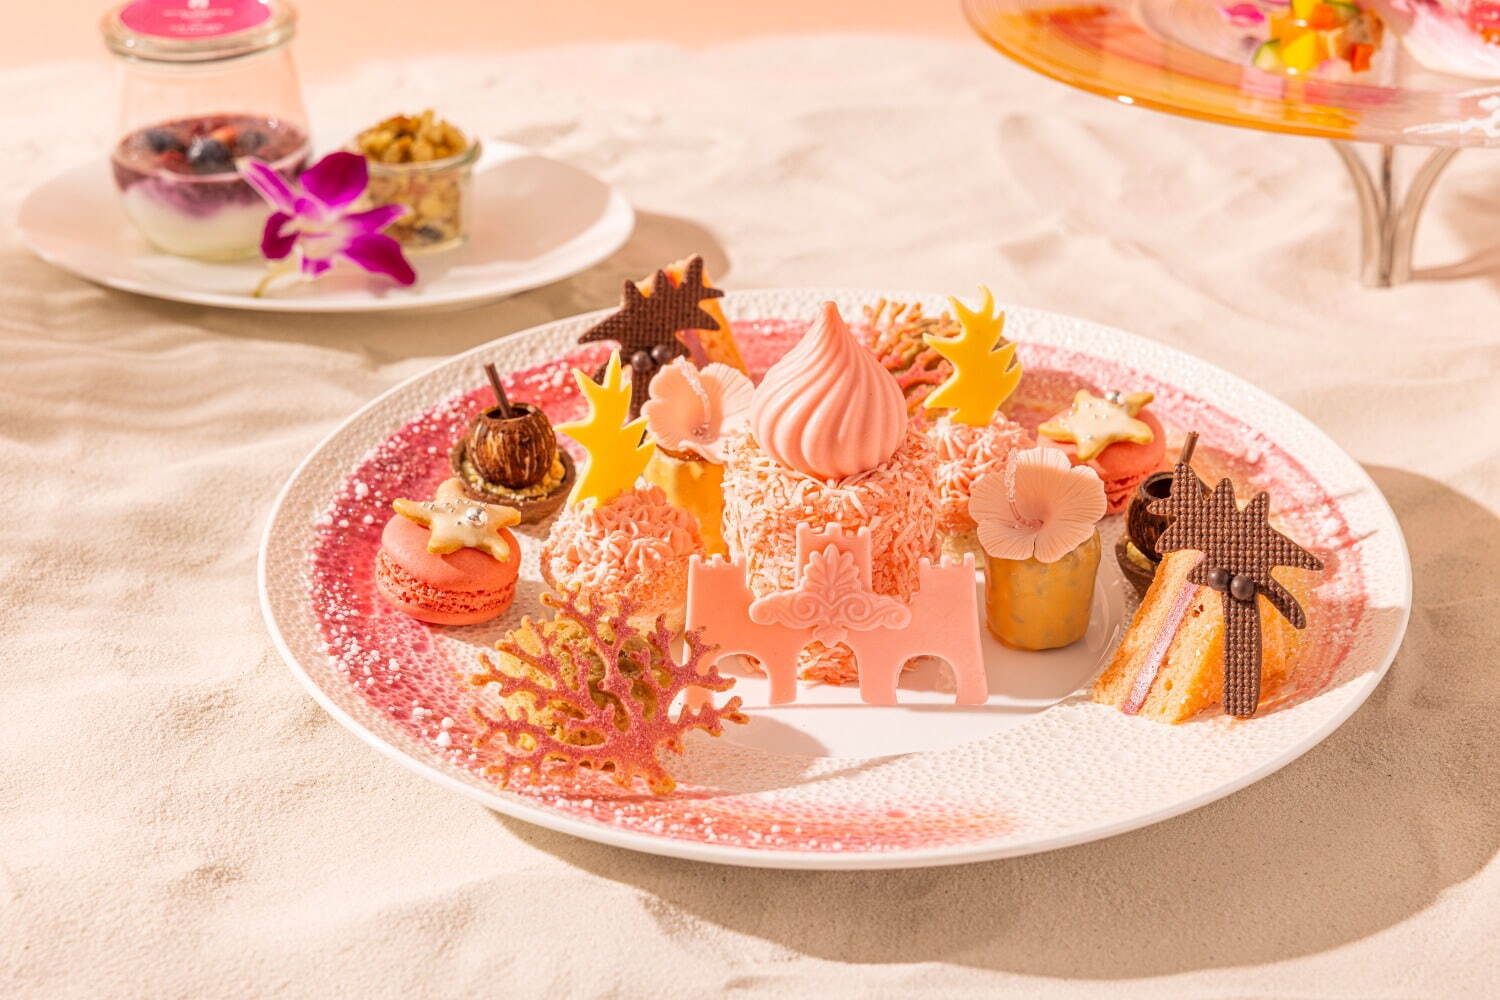 「Sunset Pink Palace Afternoon Tea～Inspired by The Royal Hawaiian～」7,500円～